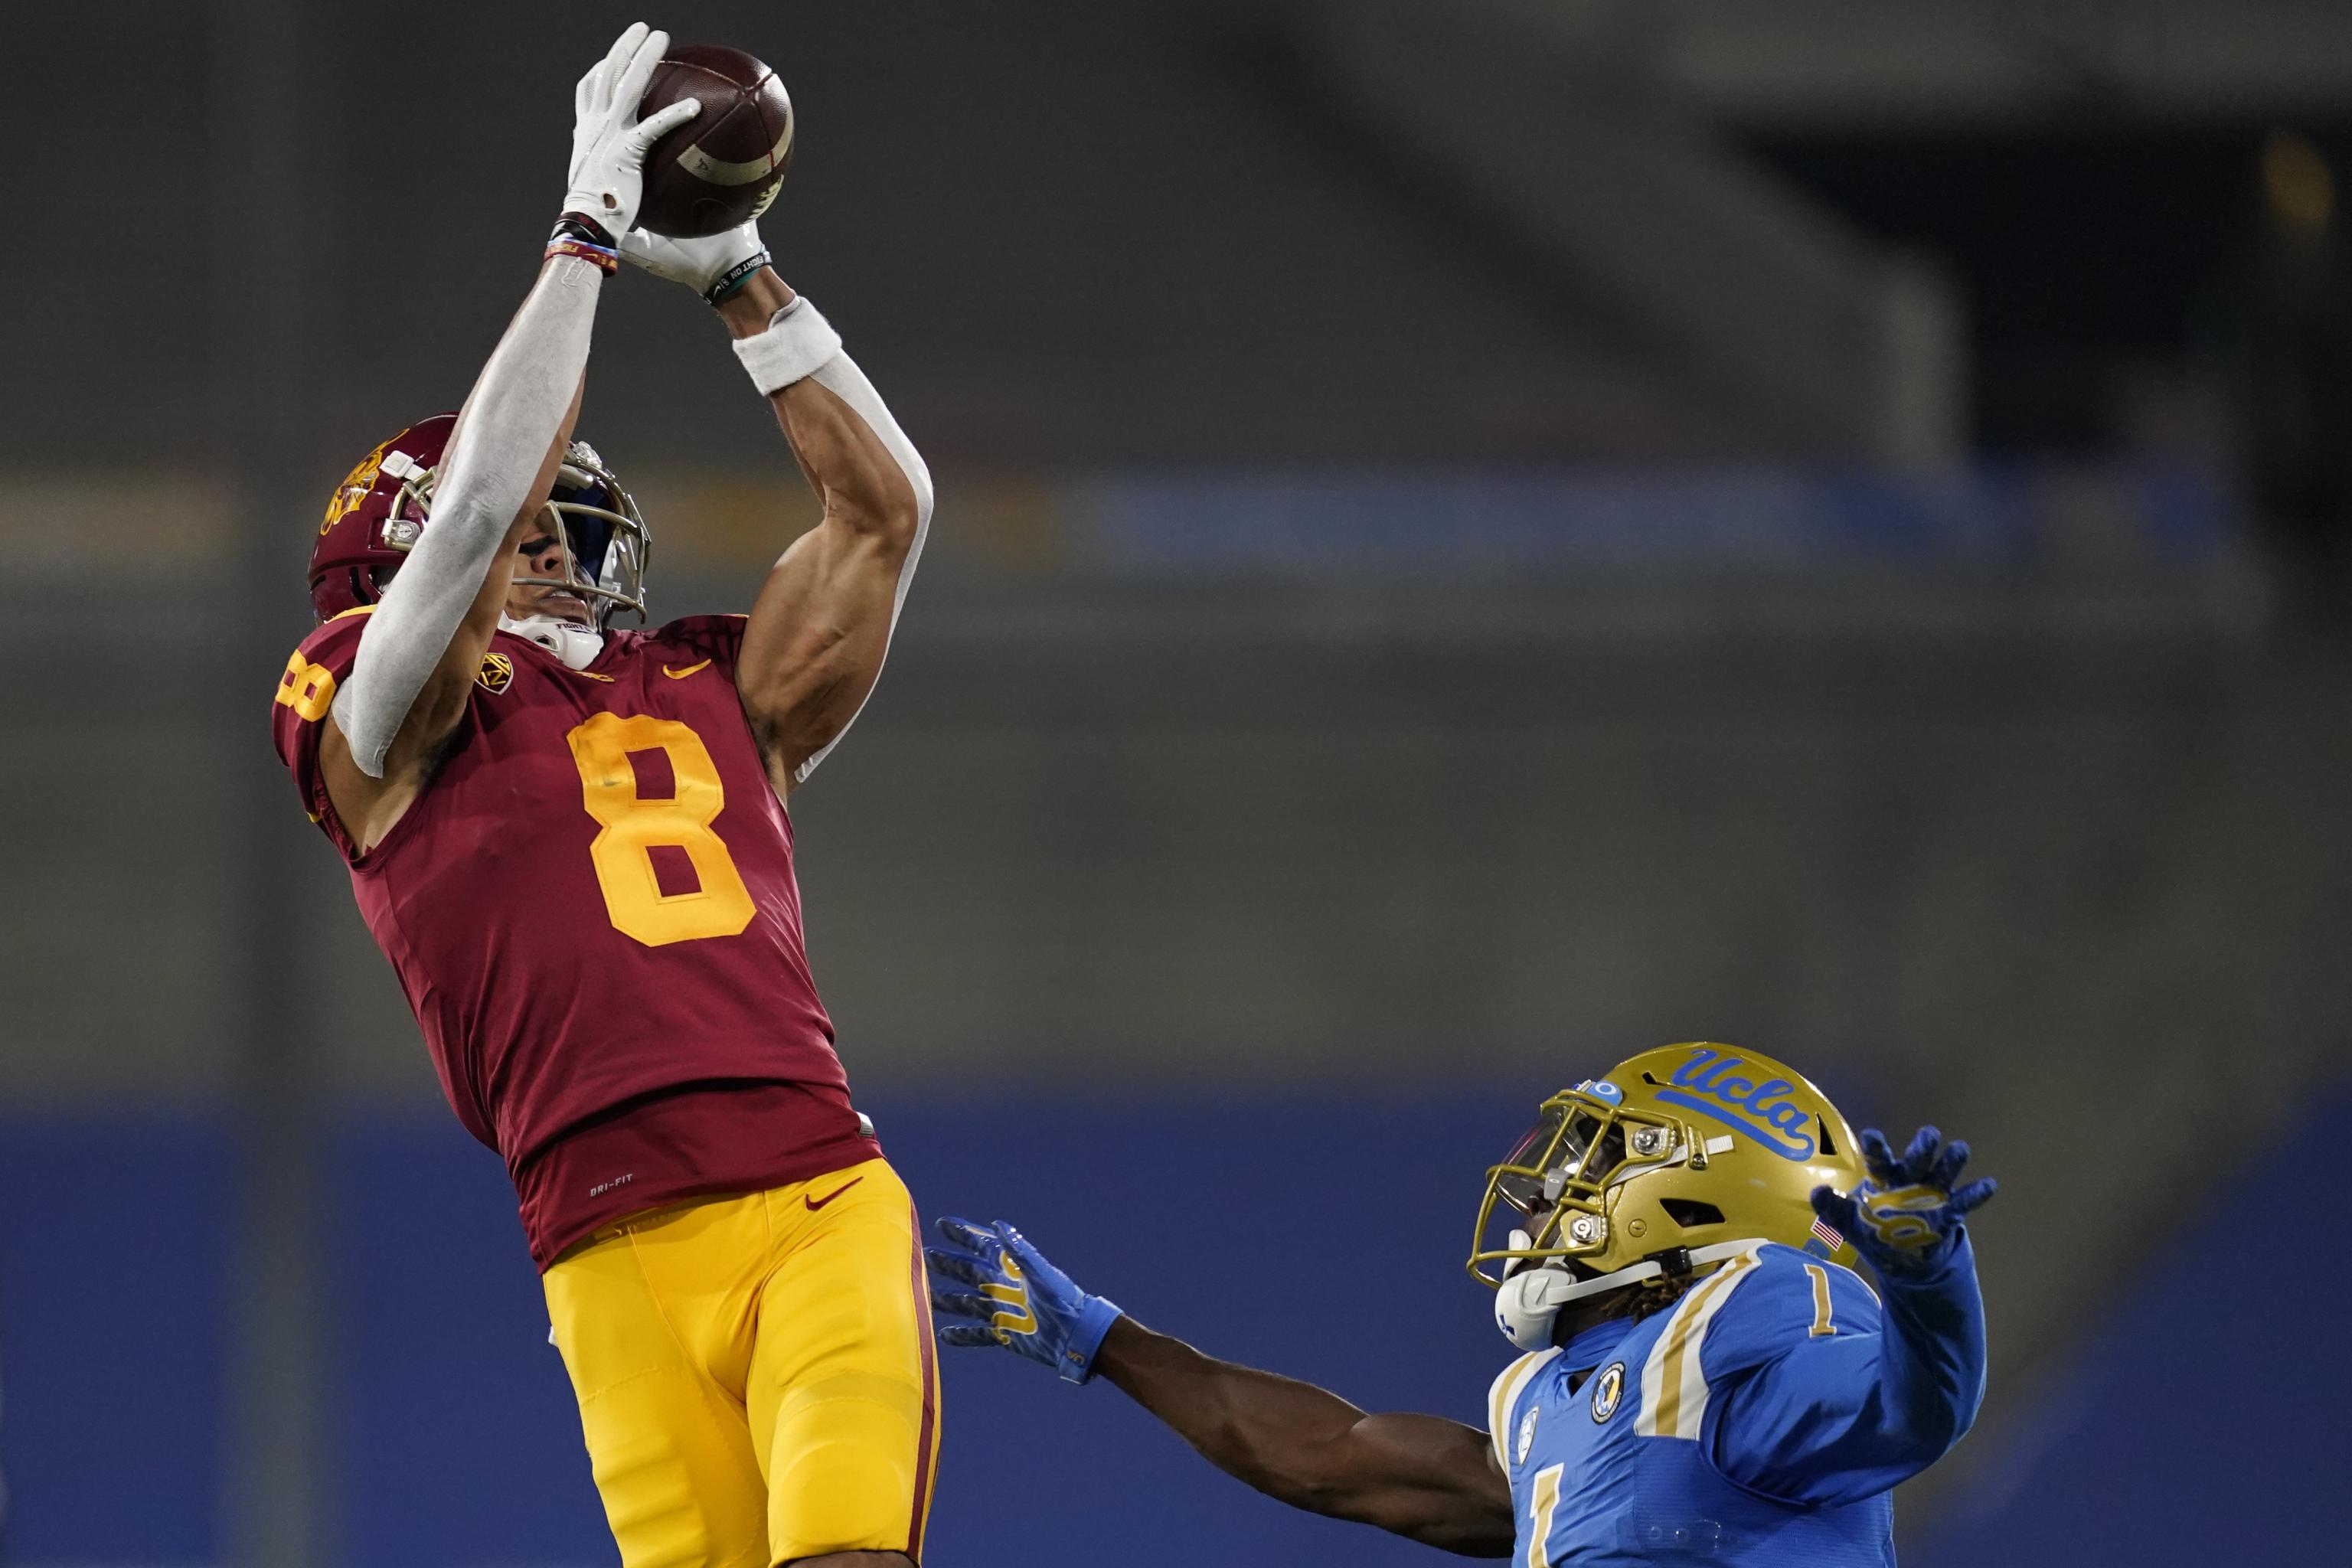 VIDEO: Lions WR Amon-Ra St. Brown pokes fun at his NFL Draft scouting  report - Pride Of Detroit